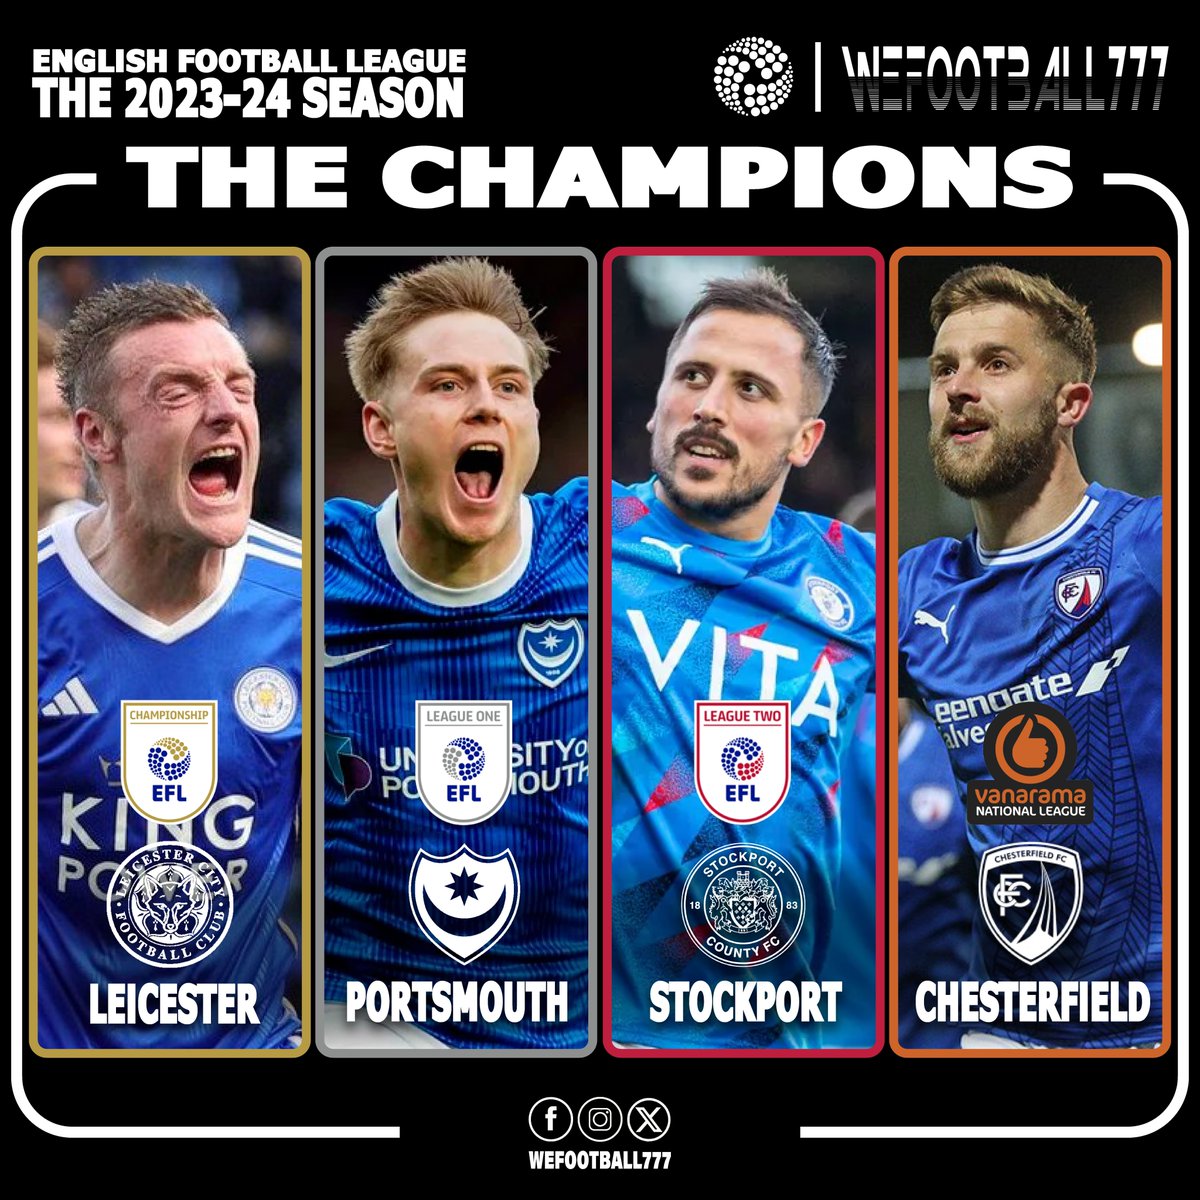 THE CHAMPIONS OF ENGLISH FOOTBALL LEAGUE
#wefootball777 #football #EFL #EFLChampionship #championship #eflleagueone #leagueone #eflleaguetwo #leaguetwo #vanaramanationalleague #NationalLeague
#LeicesterCityFC #portsmouthfc #StockportCountyFC #ChesterfieldFC